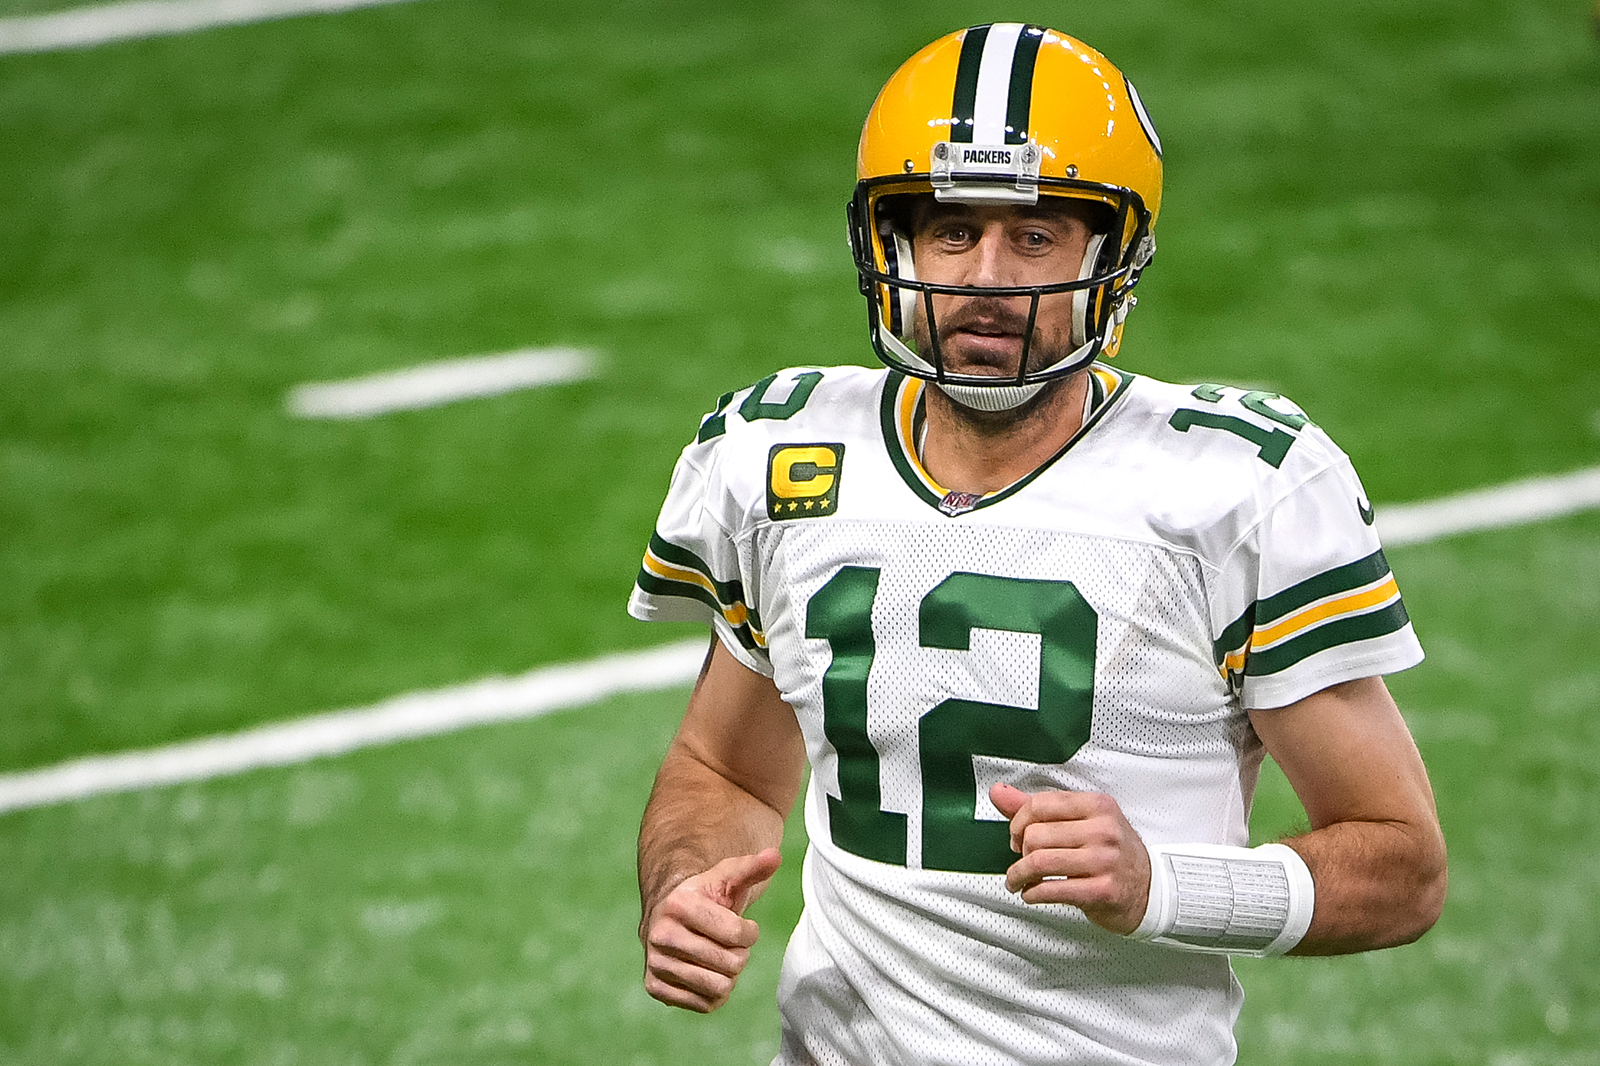 Aaron Rodgers #12 of the Green Bay Packers runs off the field during the first half against the Detroit Lions at Ford Field in Detroit, on December 13, 2020.